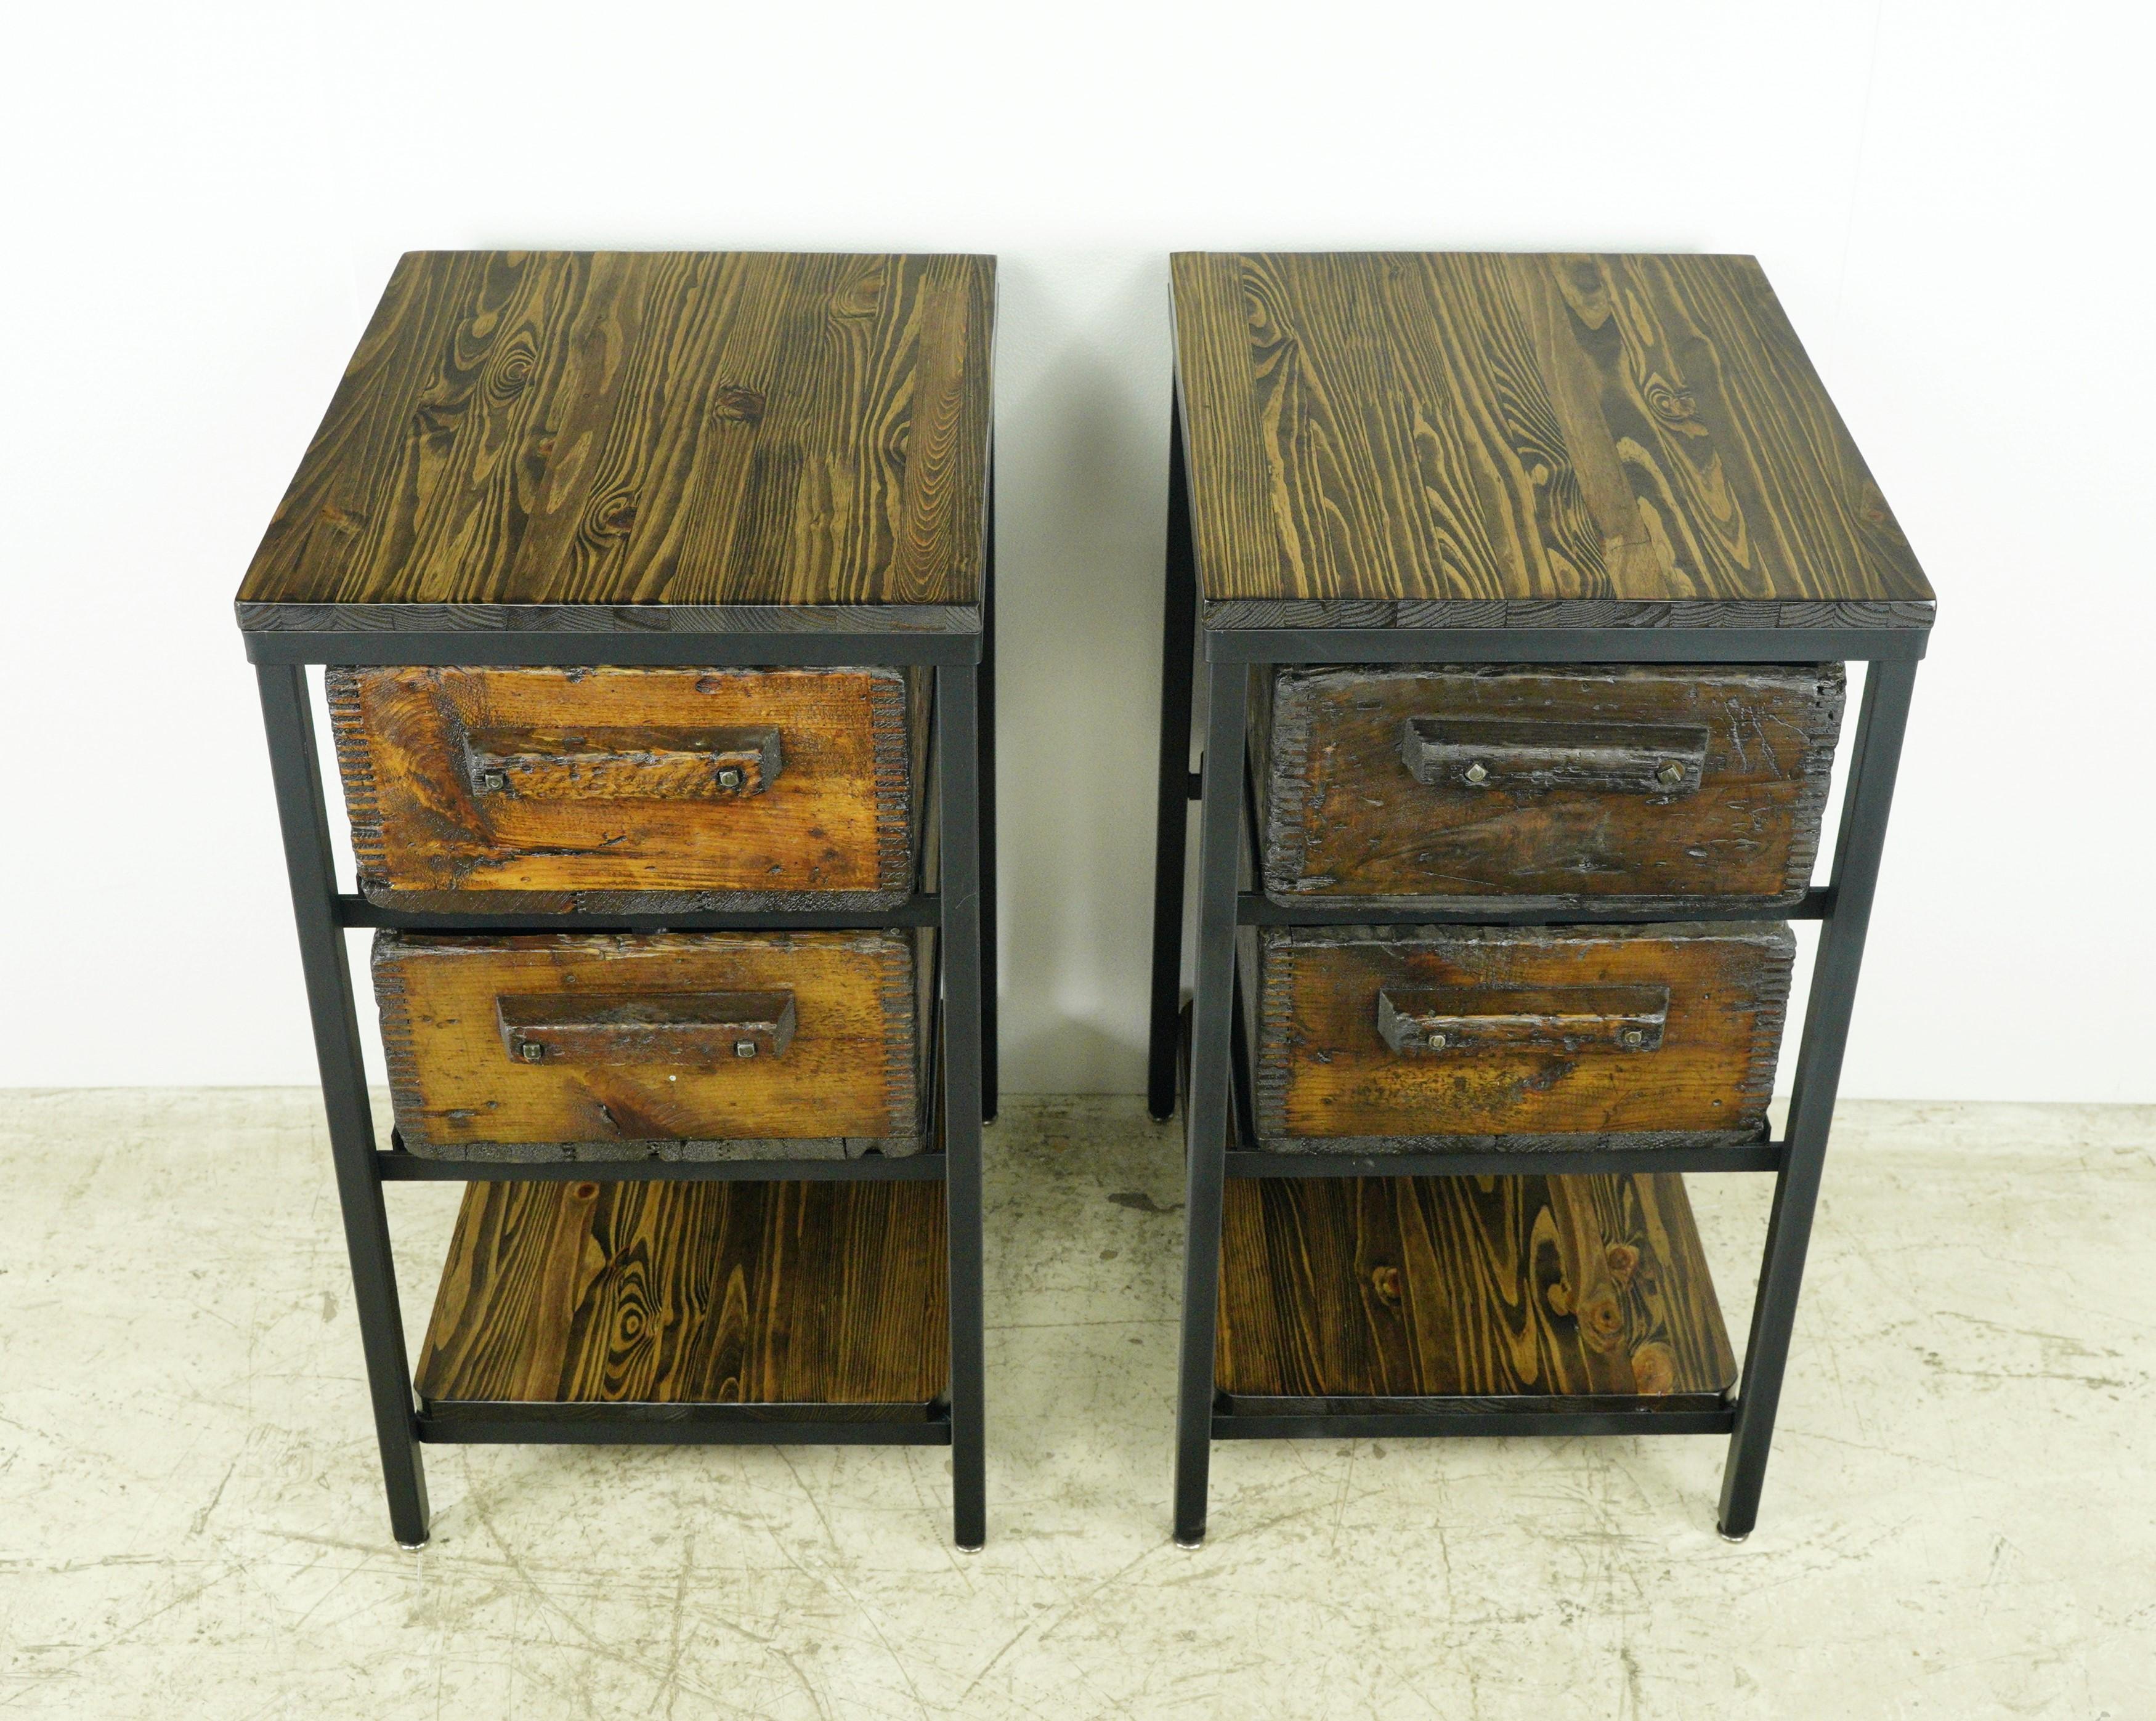 Meticulously crafted, these tables feature newly constructed black steel frames paired with pine table tops and two antique reclaimed pine drawers reclaimed from Massachusetts, creating a harmonious blend of industrial and rustic elements. The